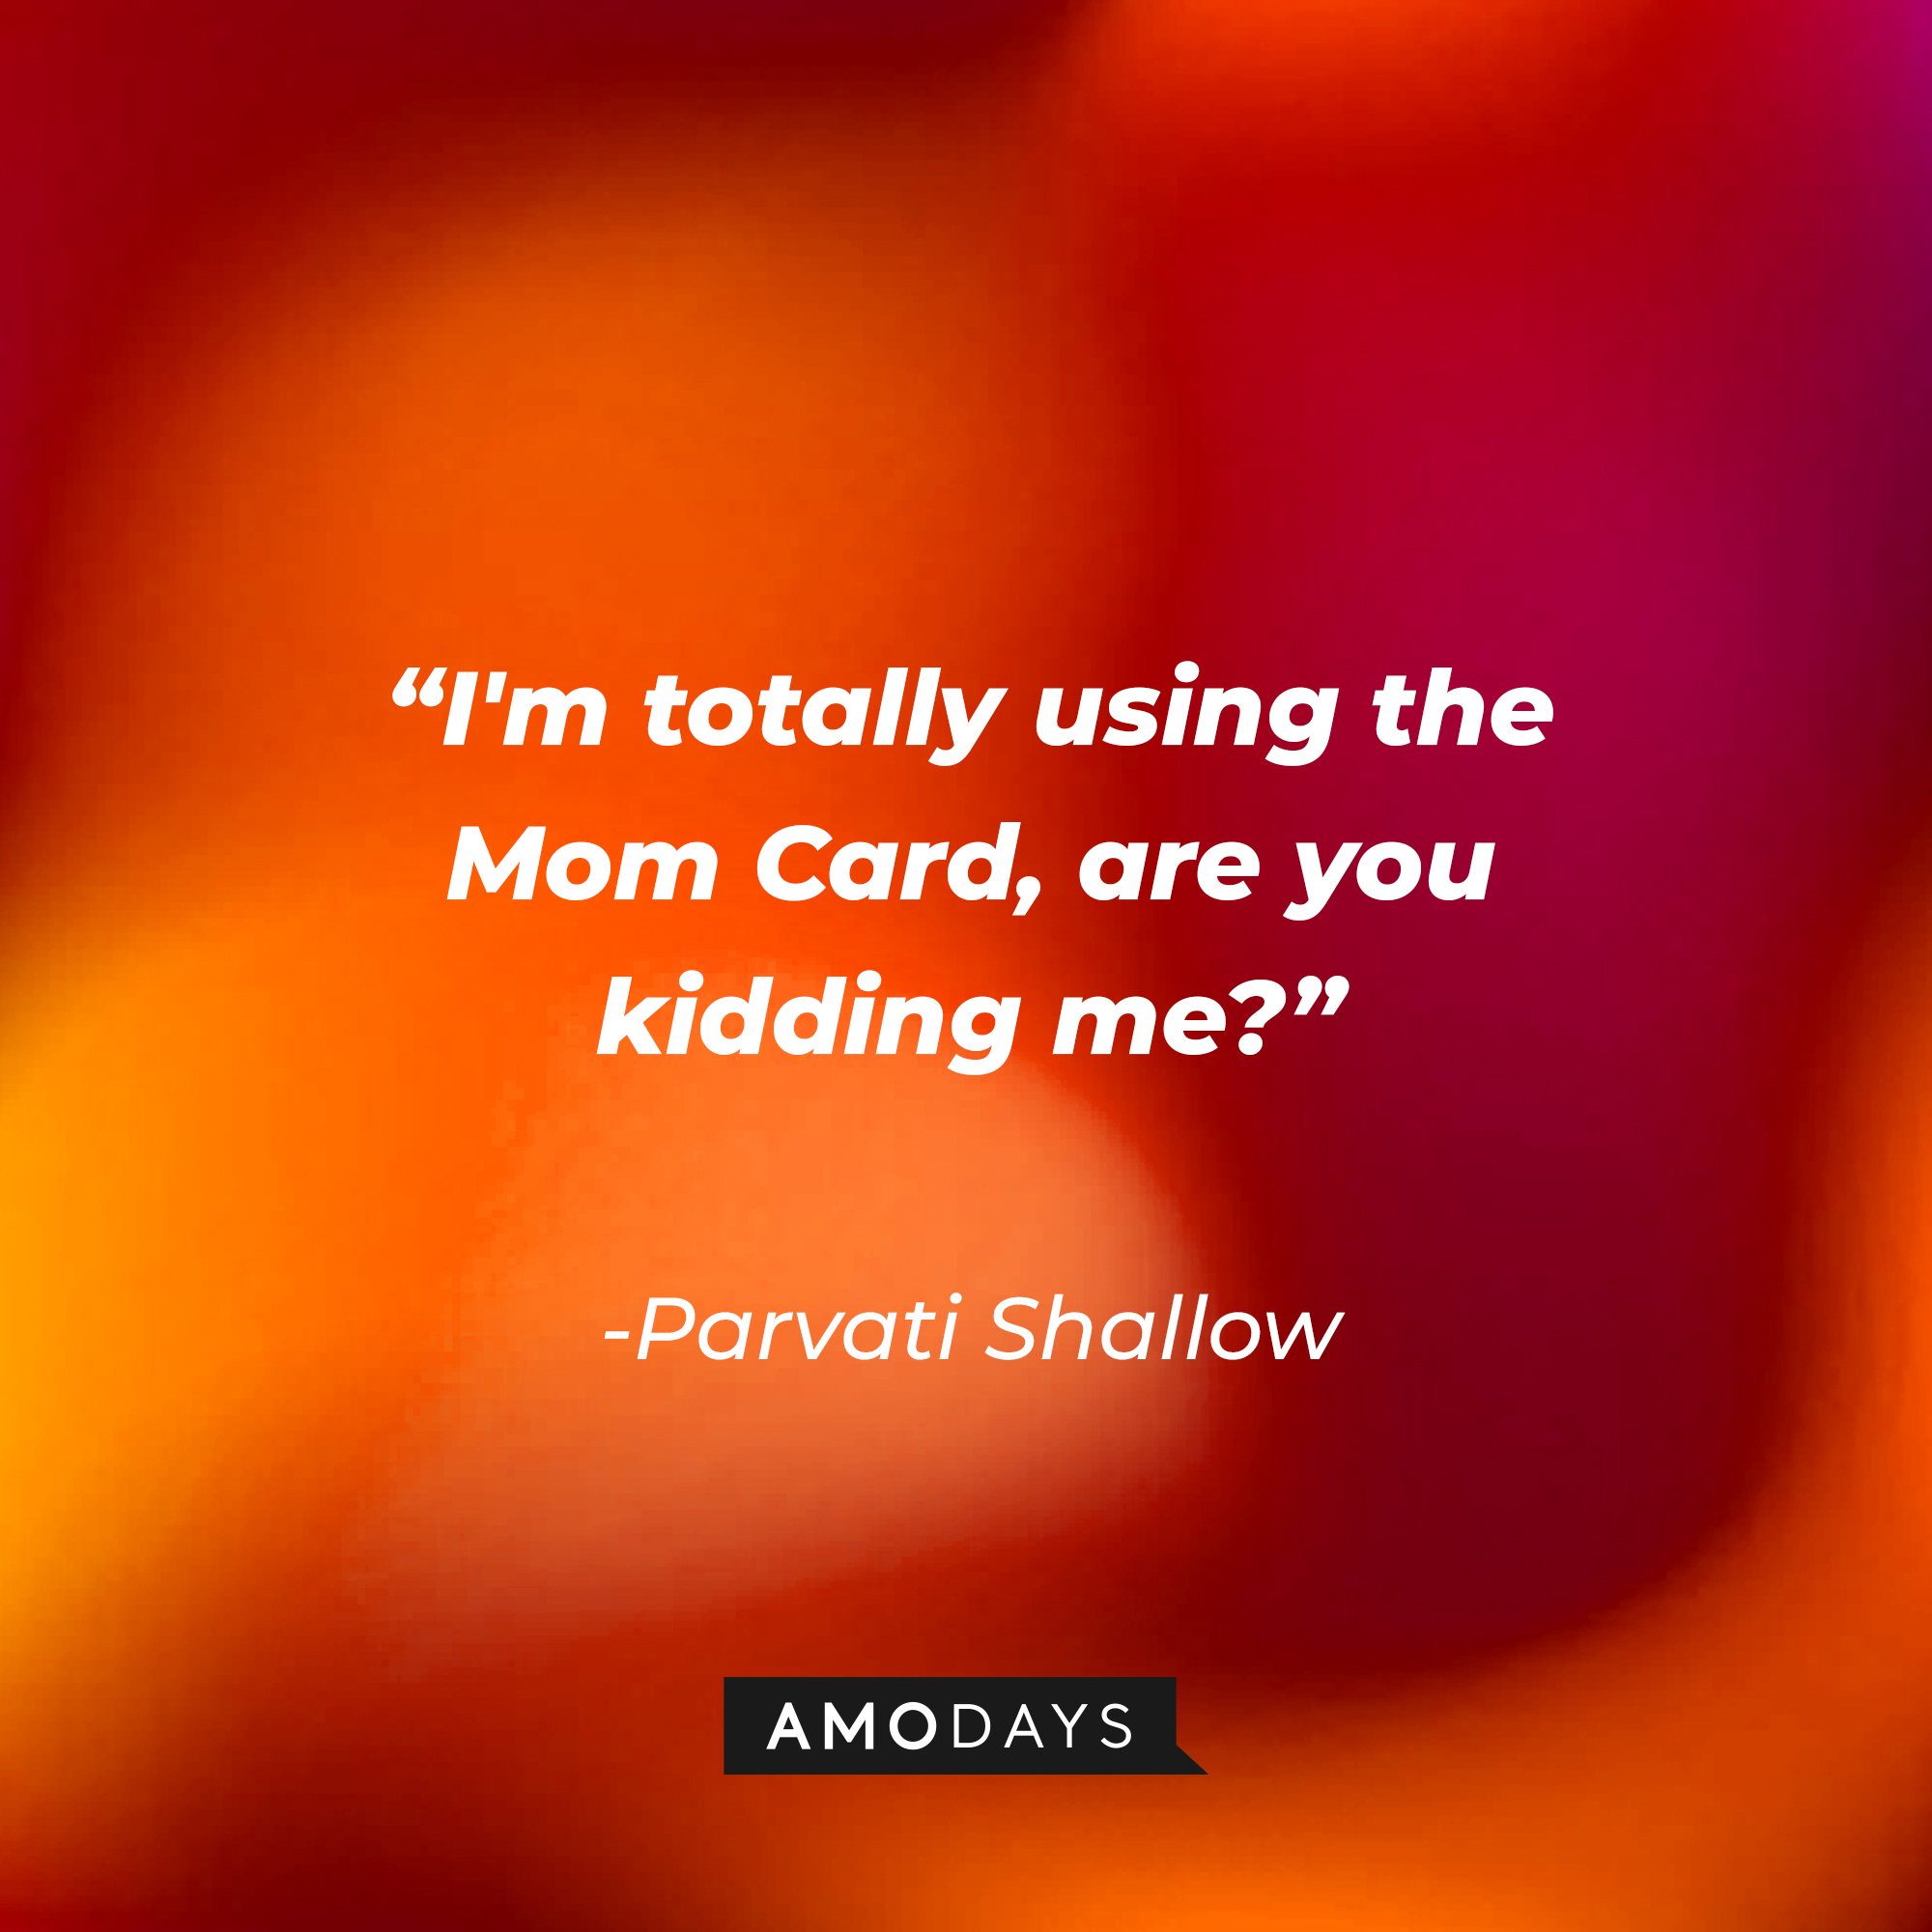 Parvati Shallow’s quote: "I'm totally using the Mom Card, are you kidding me?"│ Source: AmoDays